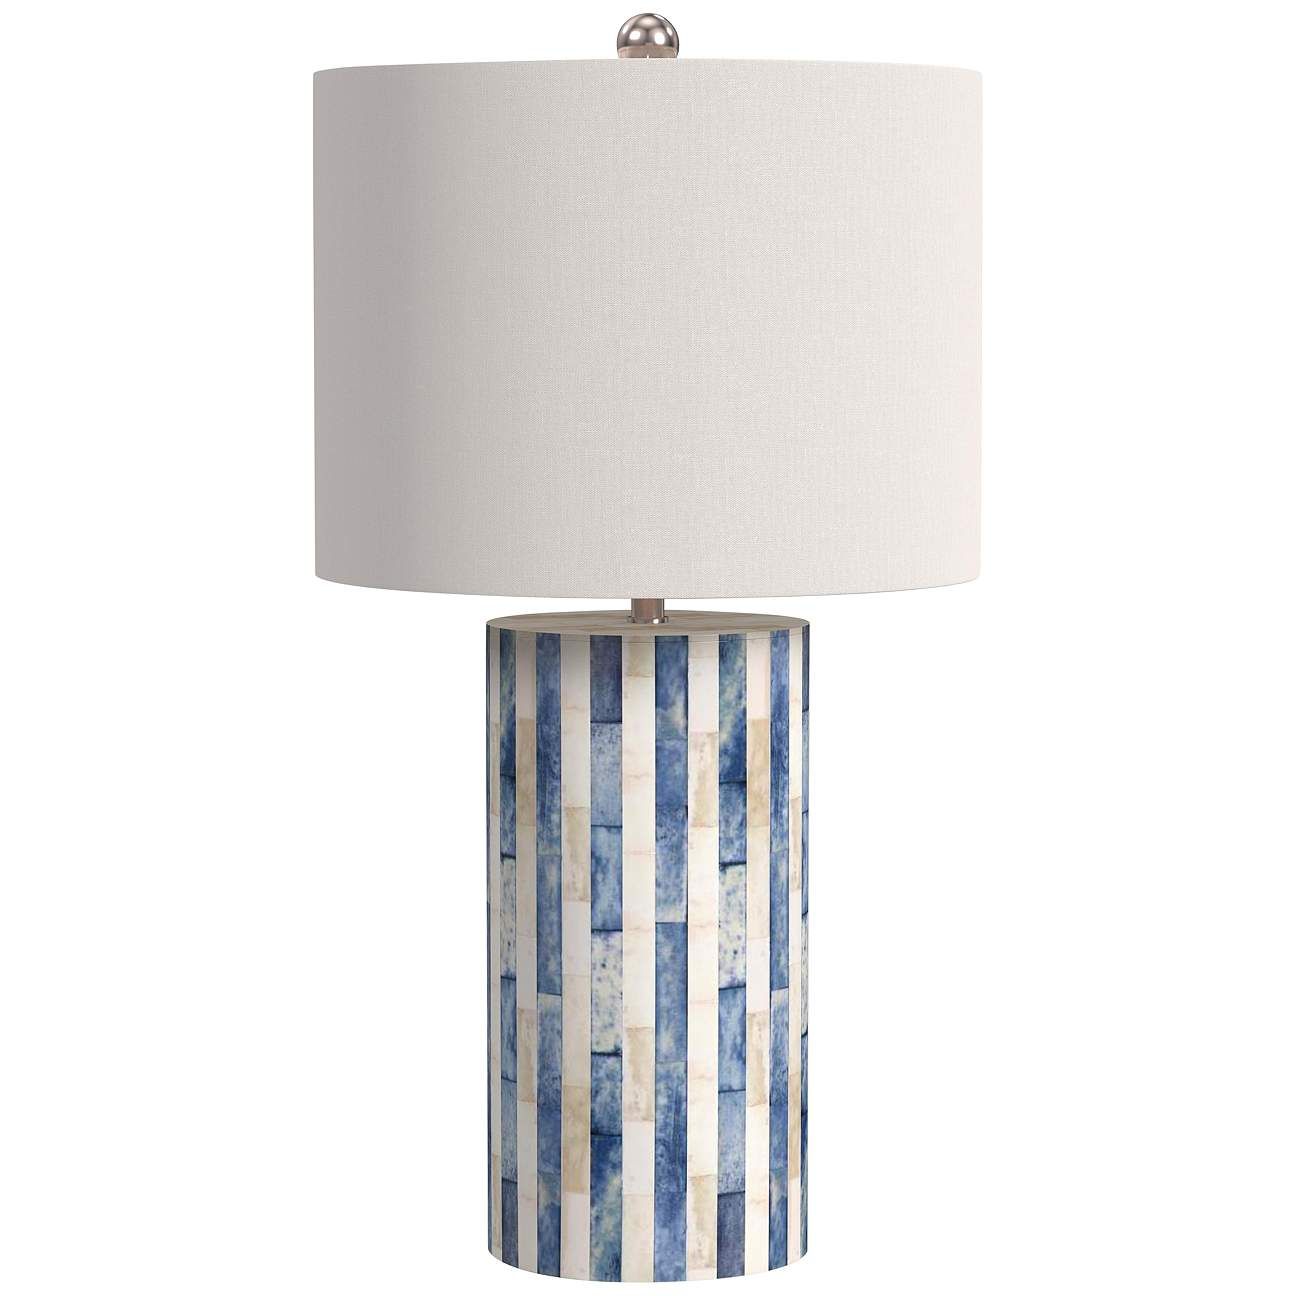 Coburn Blue and White Stripped Column Table Lamp | Lamps Plus